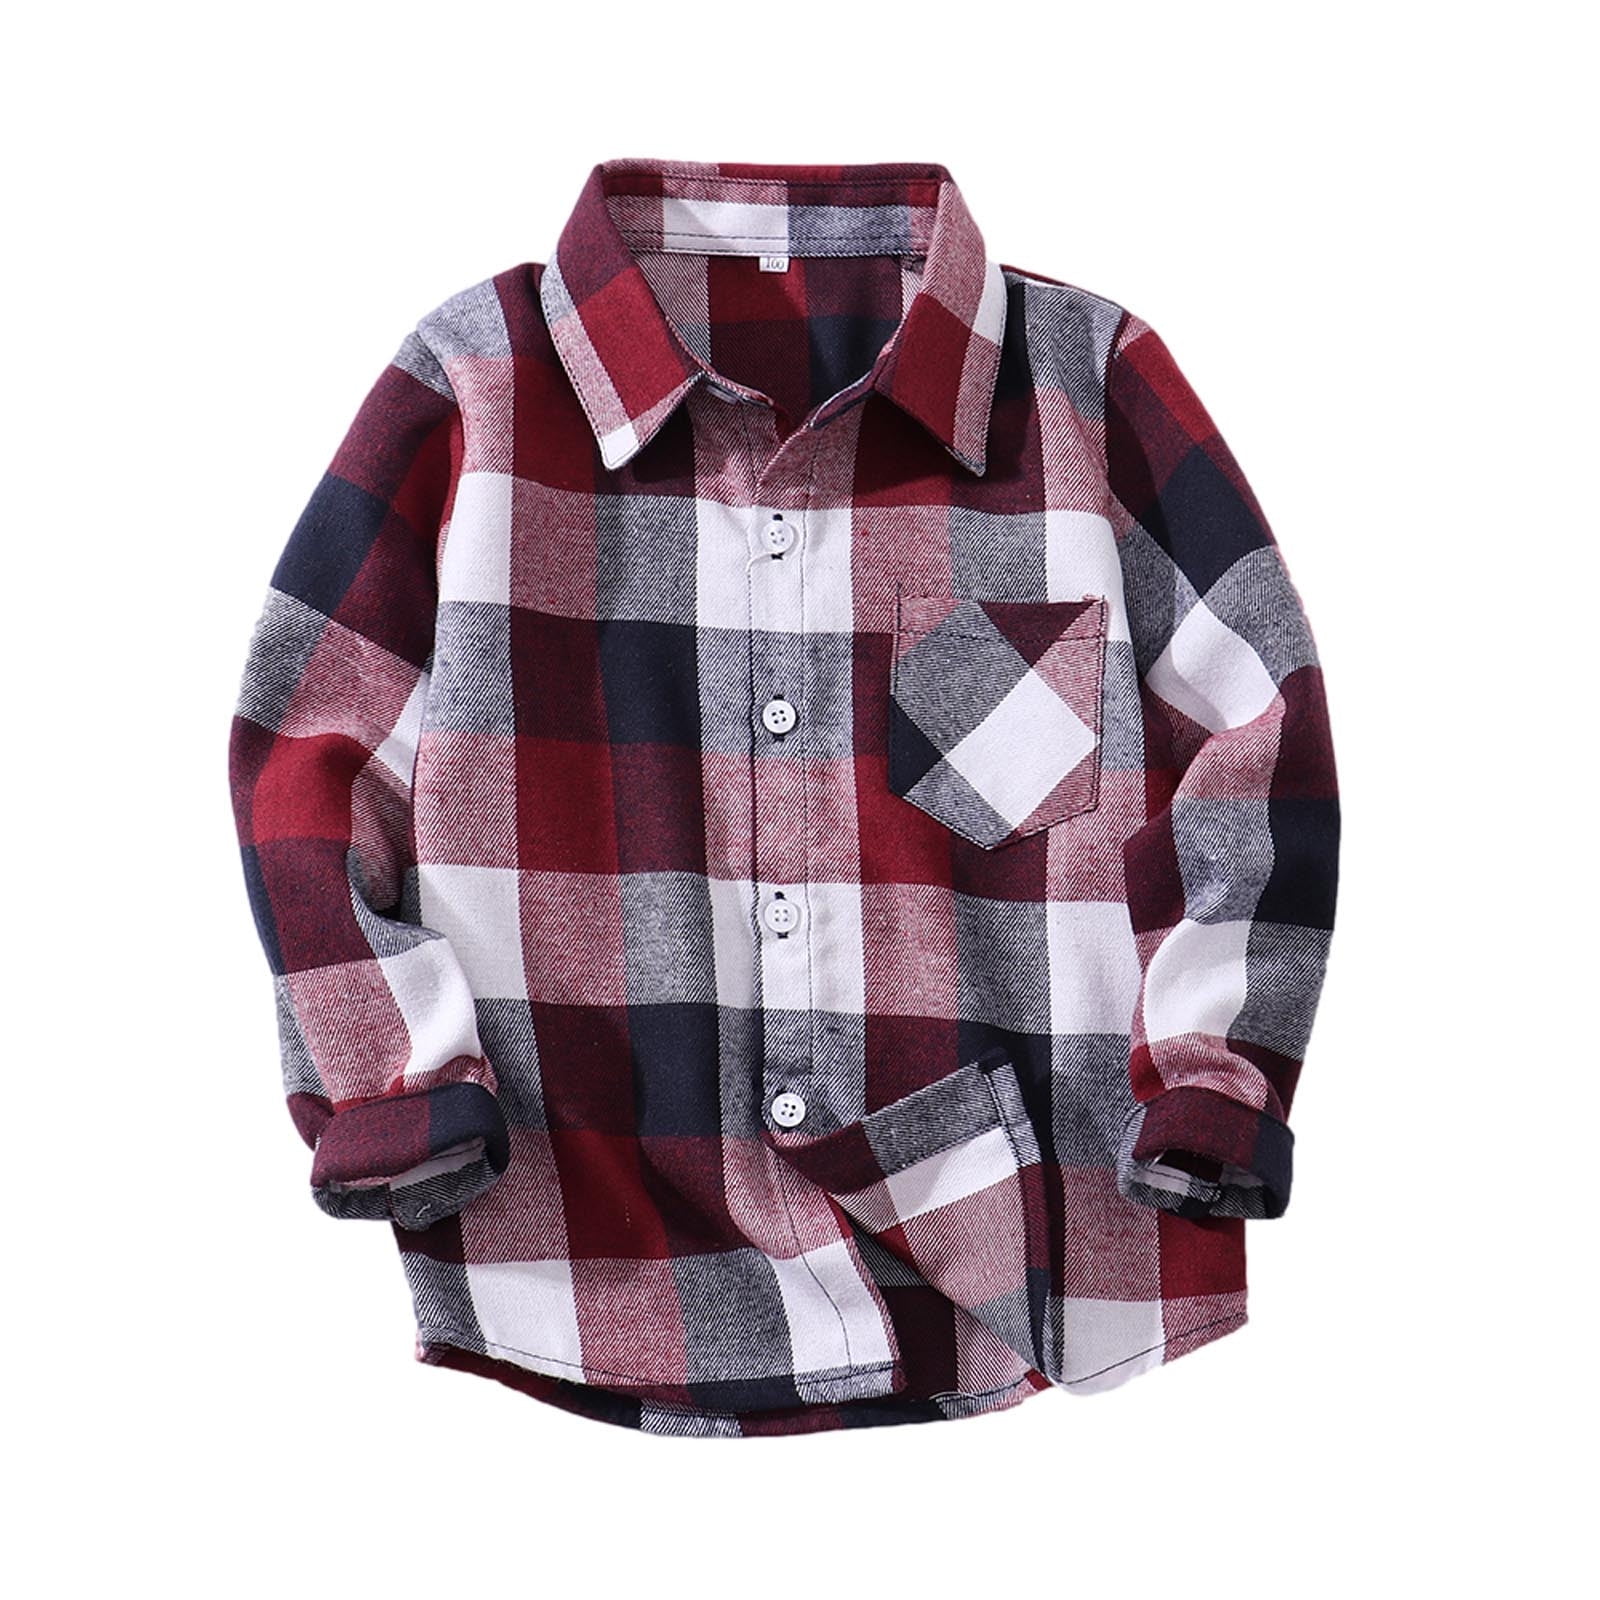 Edvintorg Kids Little Boys Girls Baby Long Sleeve Button Down Red Plaid ...